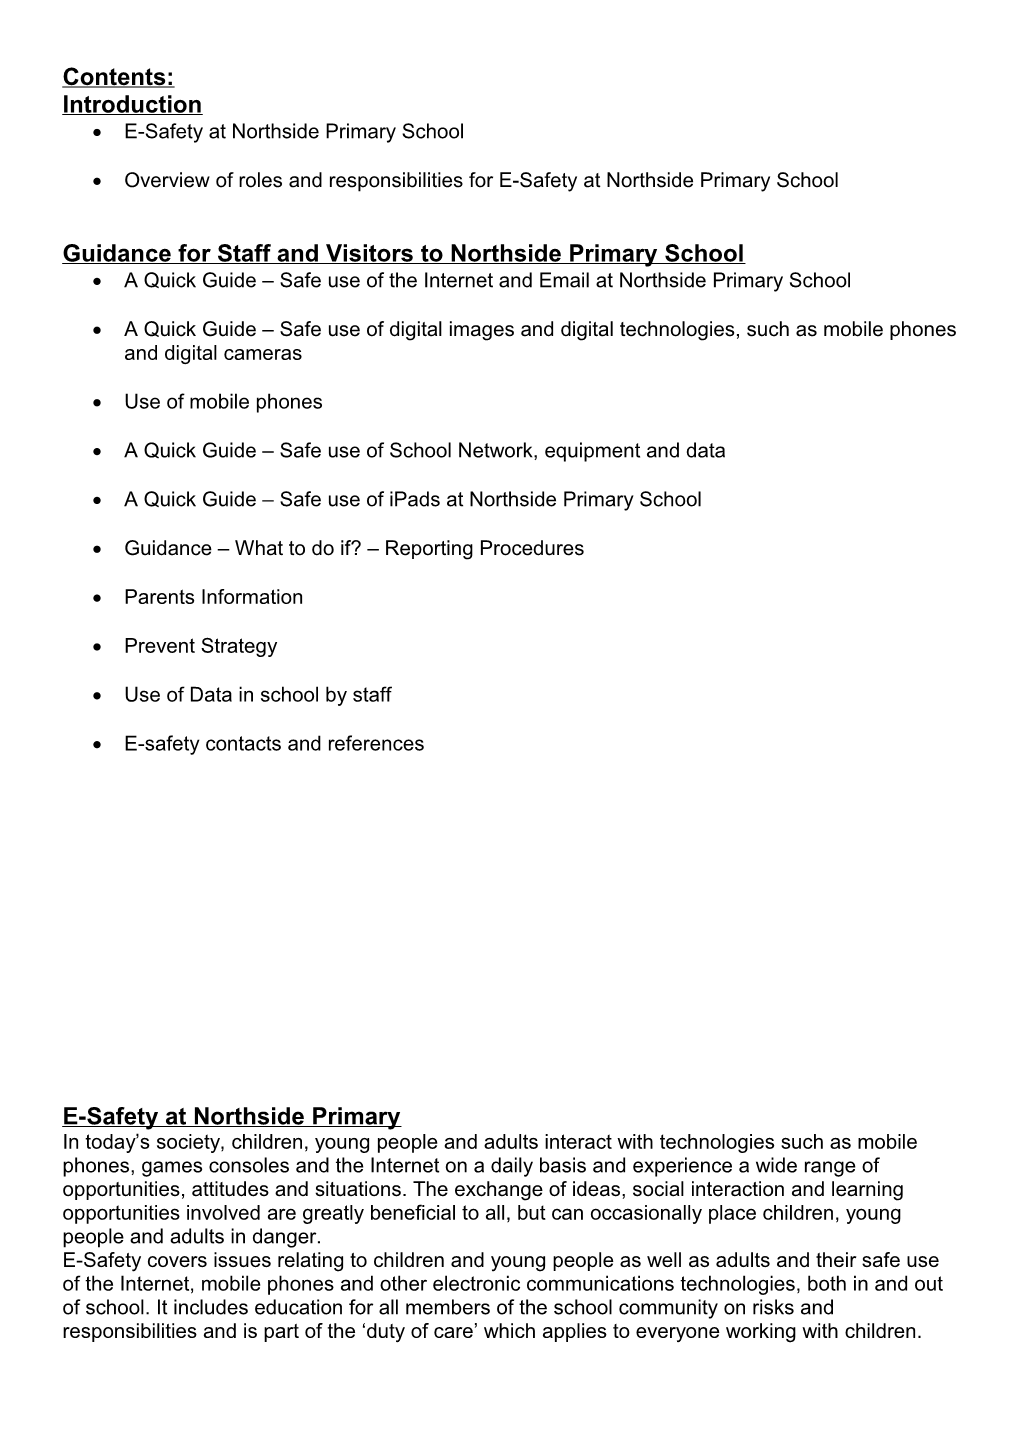 Guidance for Staff and Visitors to Northside Primary School